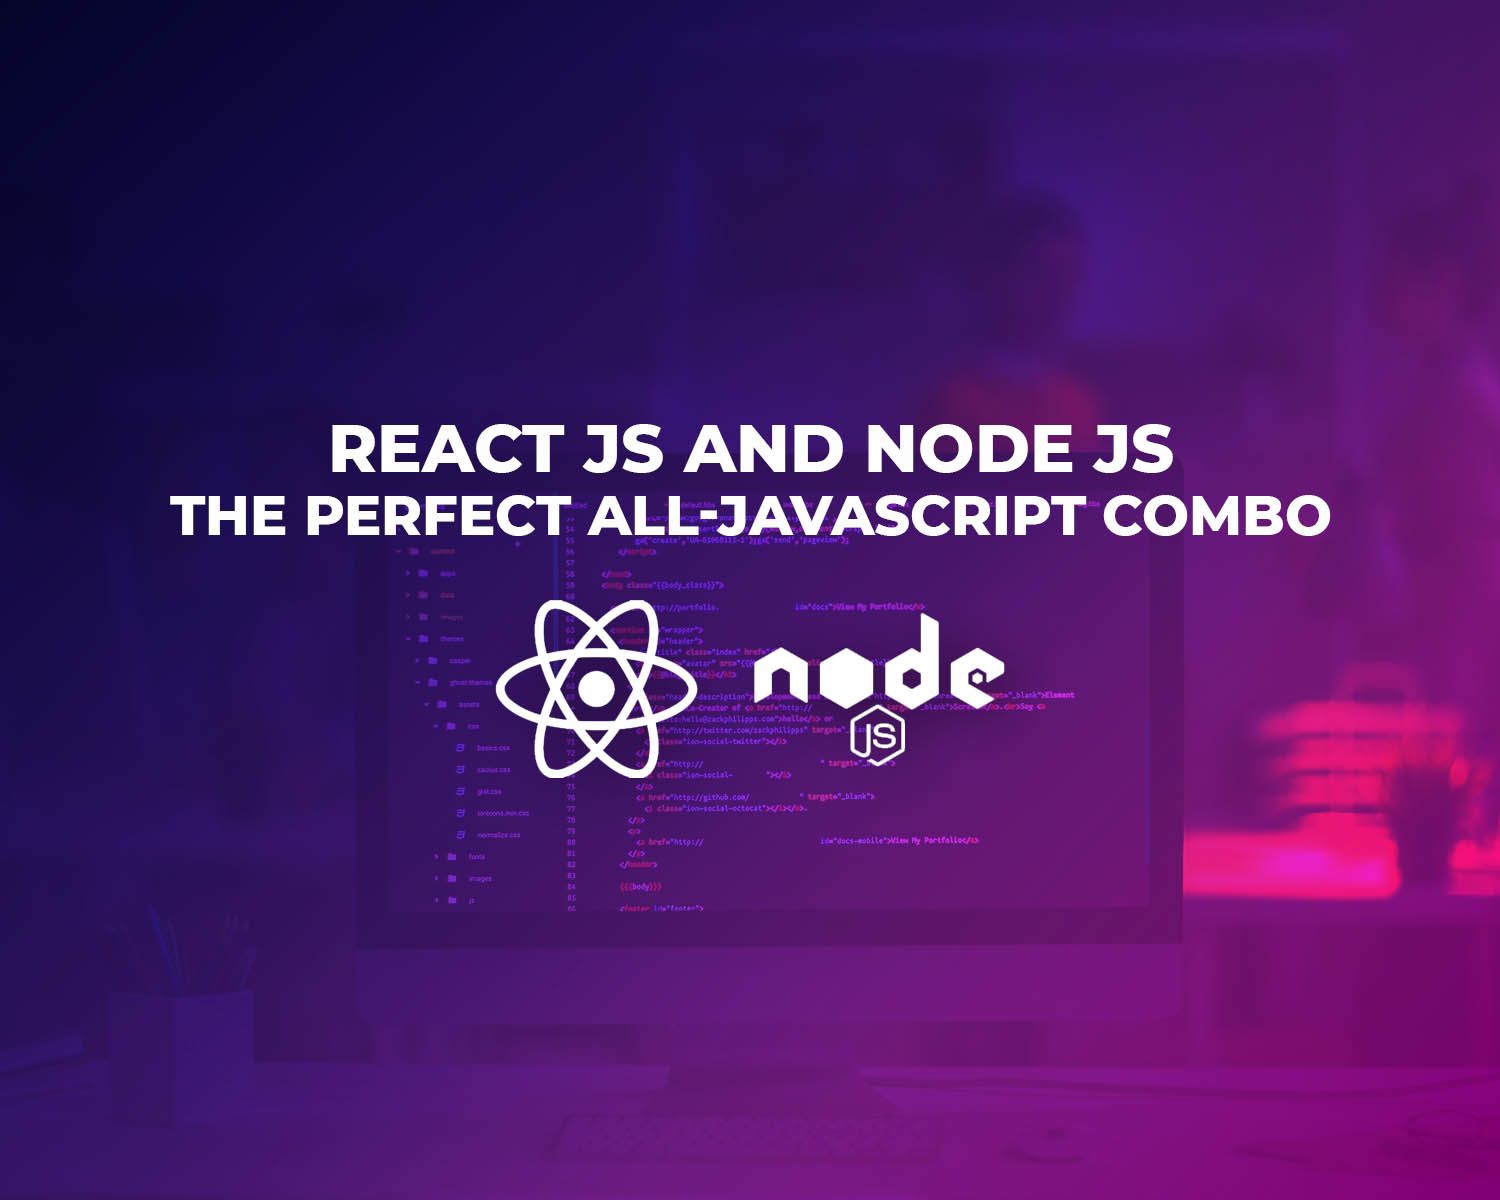 What is React js